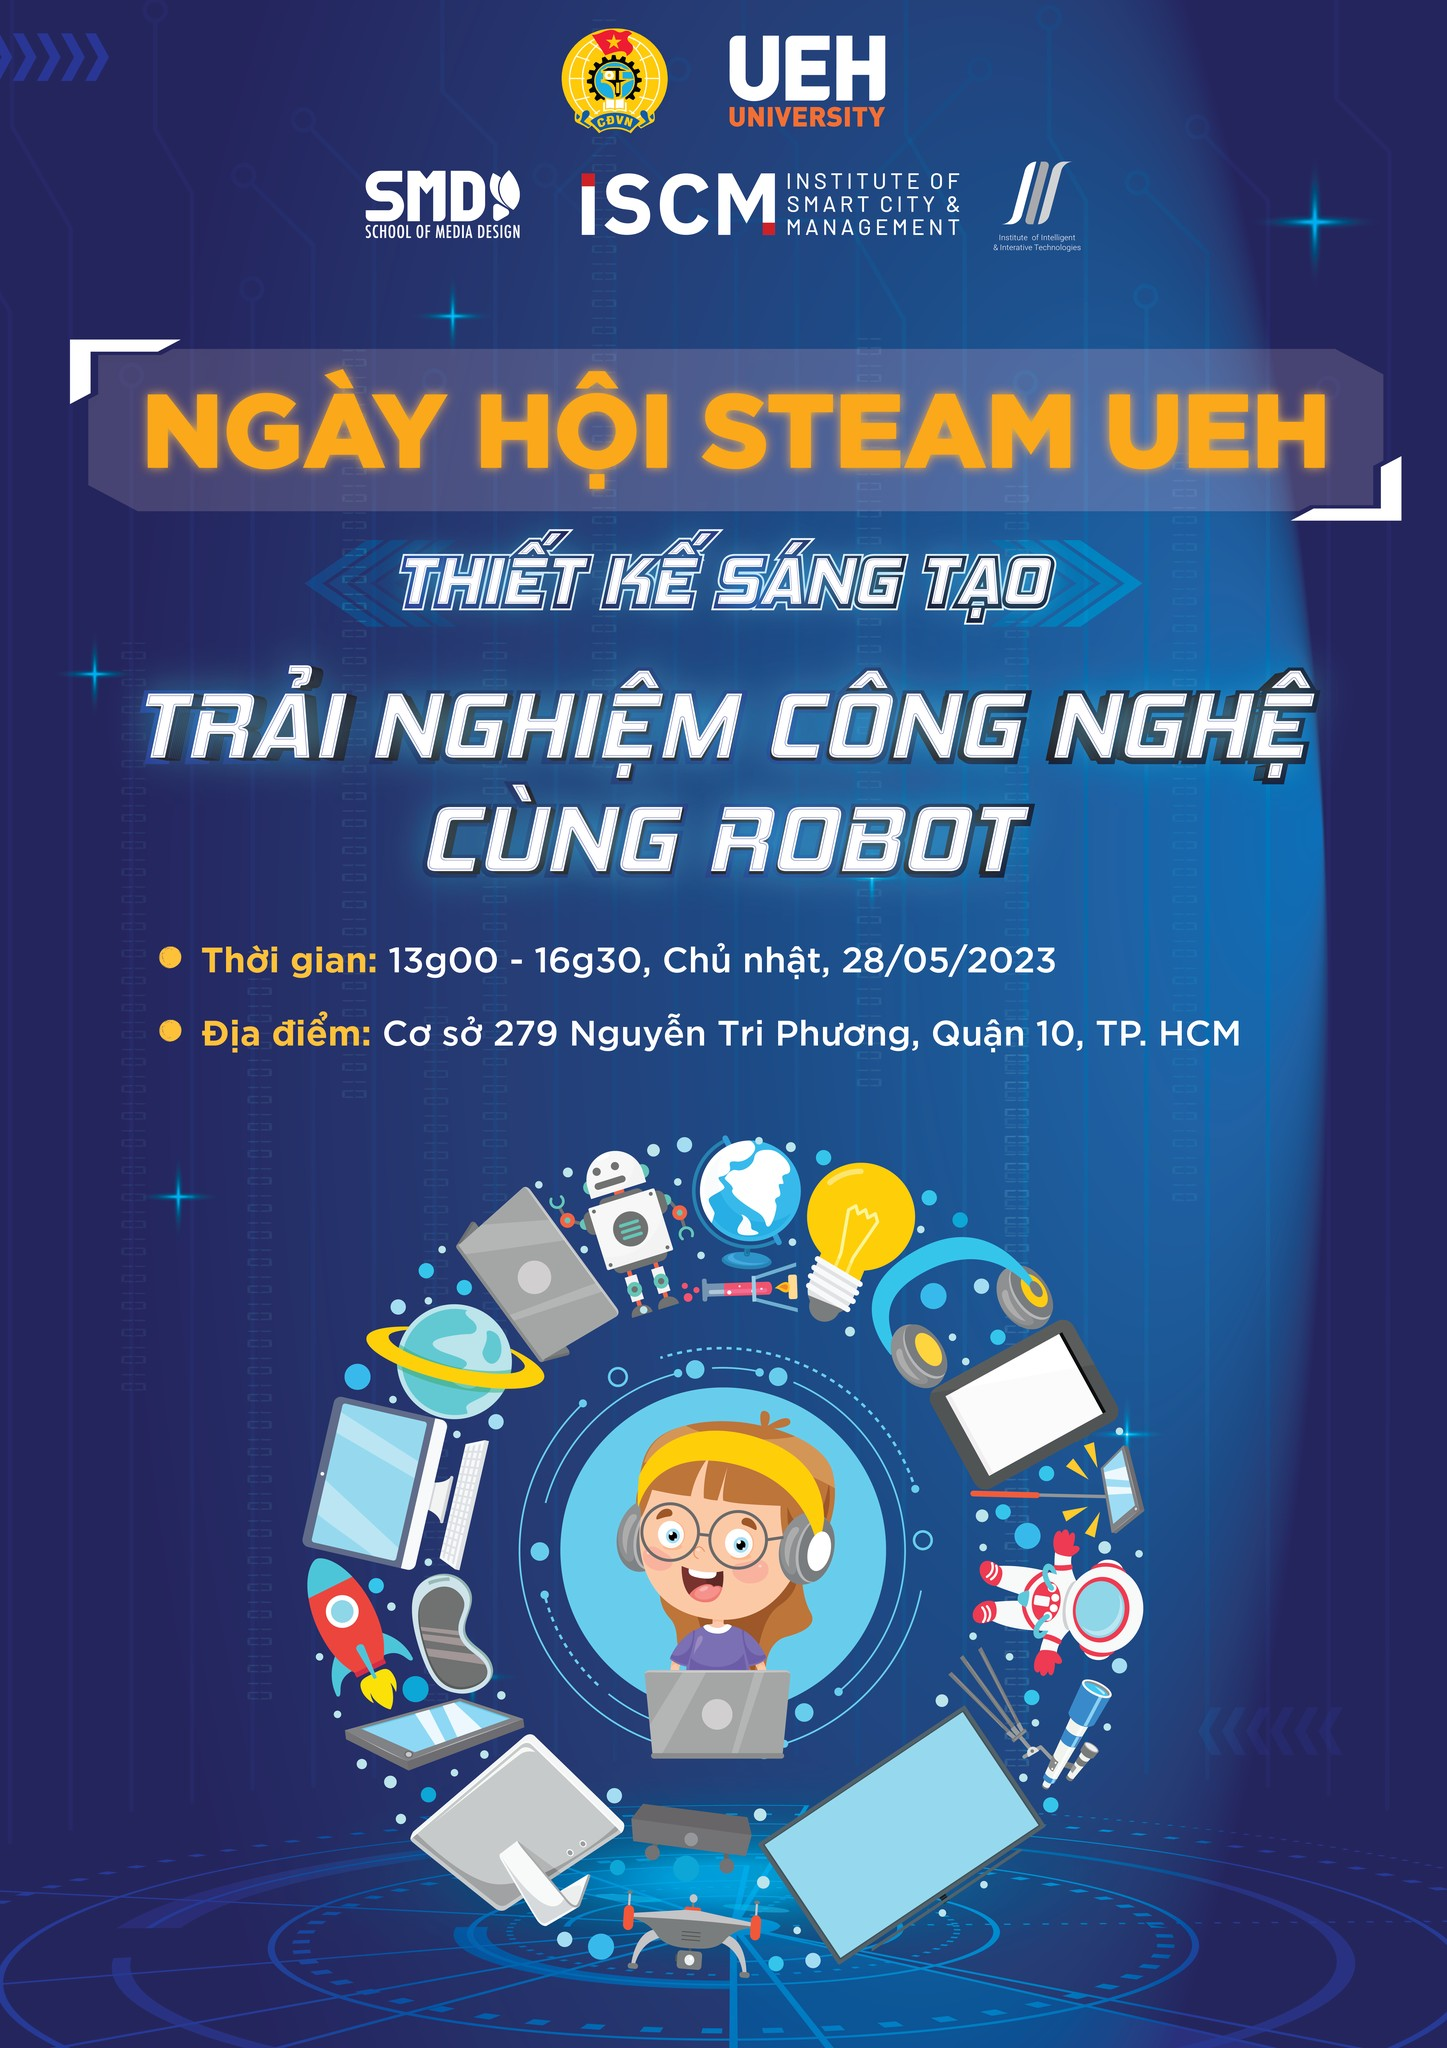 STEAM UEH FESTIVAL - EXPERIENCE ROBOT ART AND TECHNOLOGY FOR FUTURE KIDS ON THE  OCCASION OF 1/6